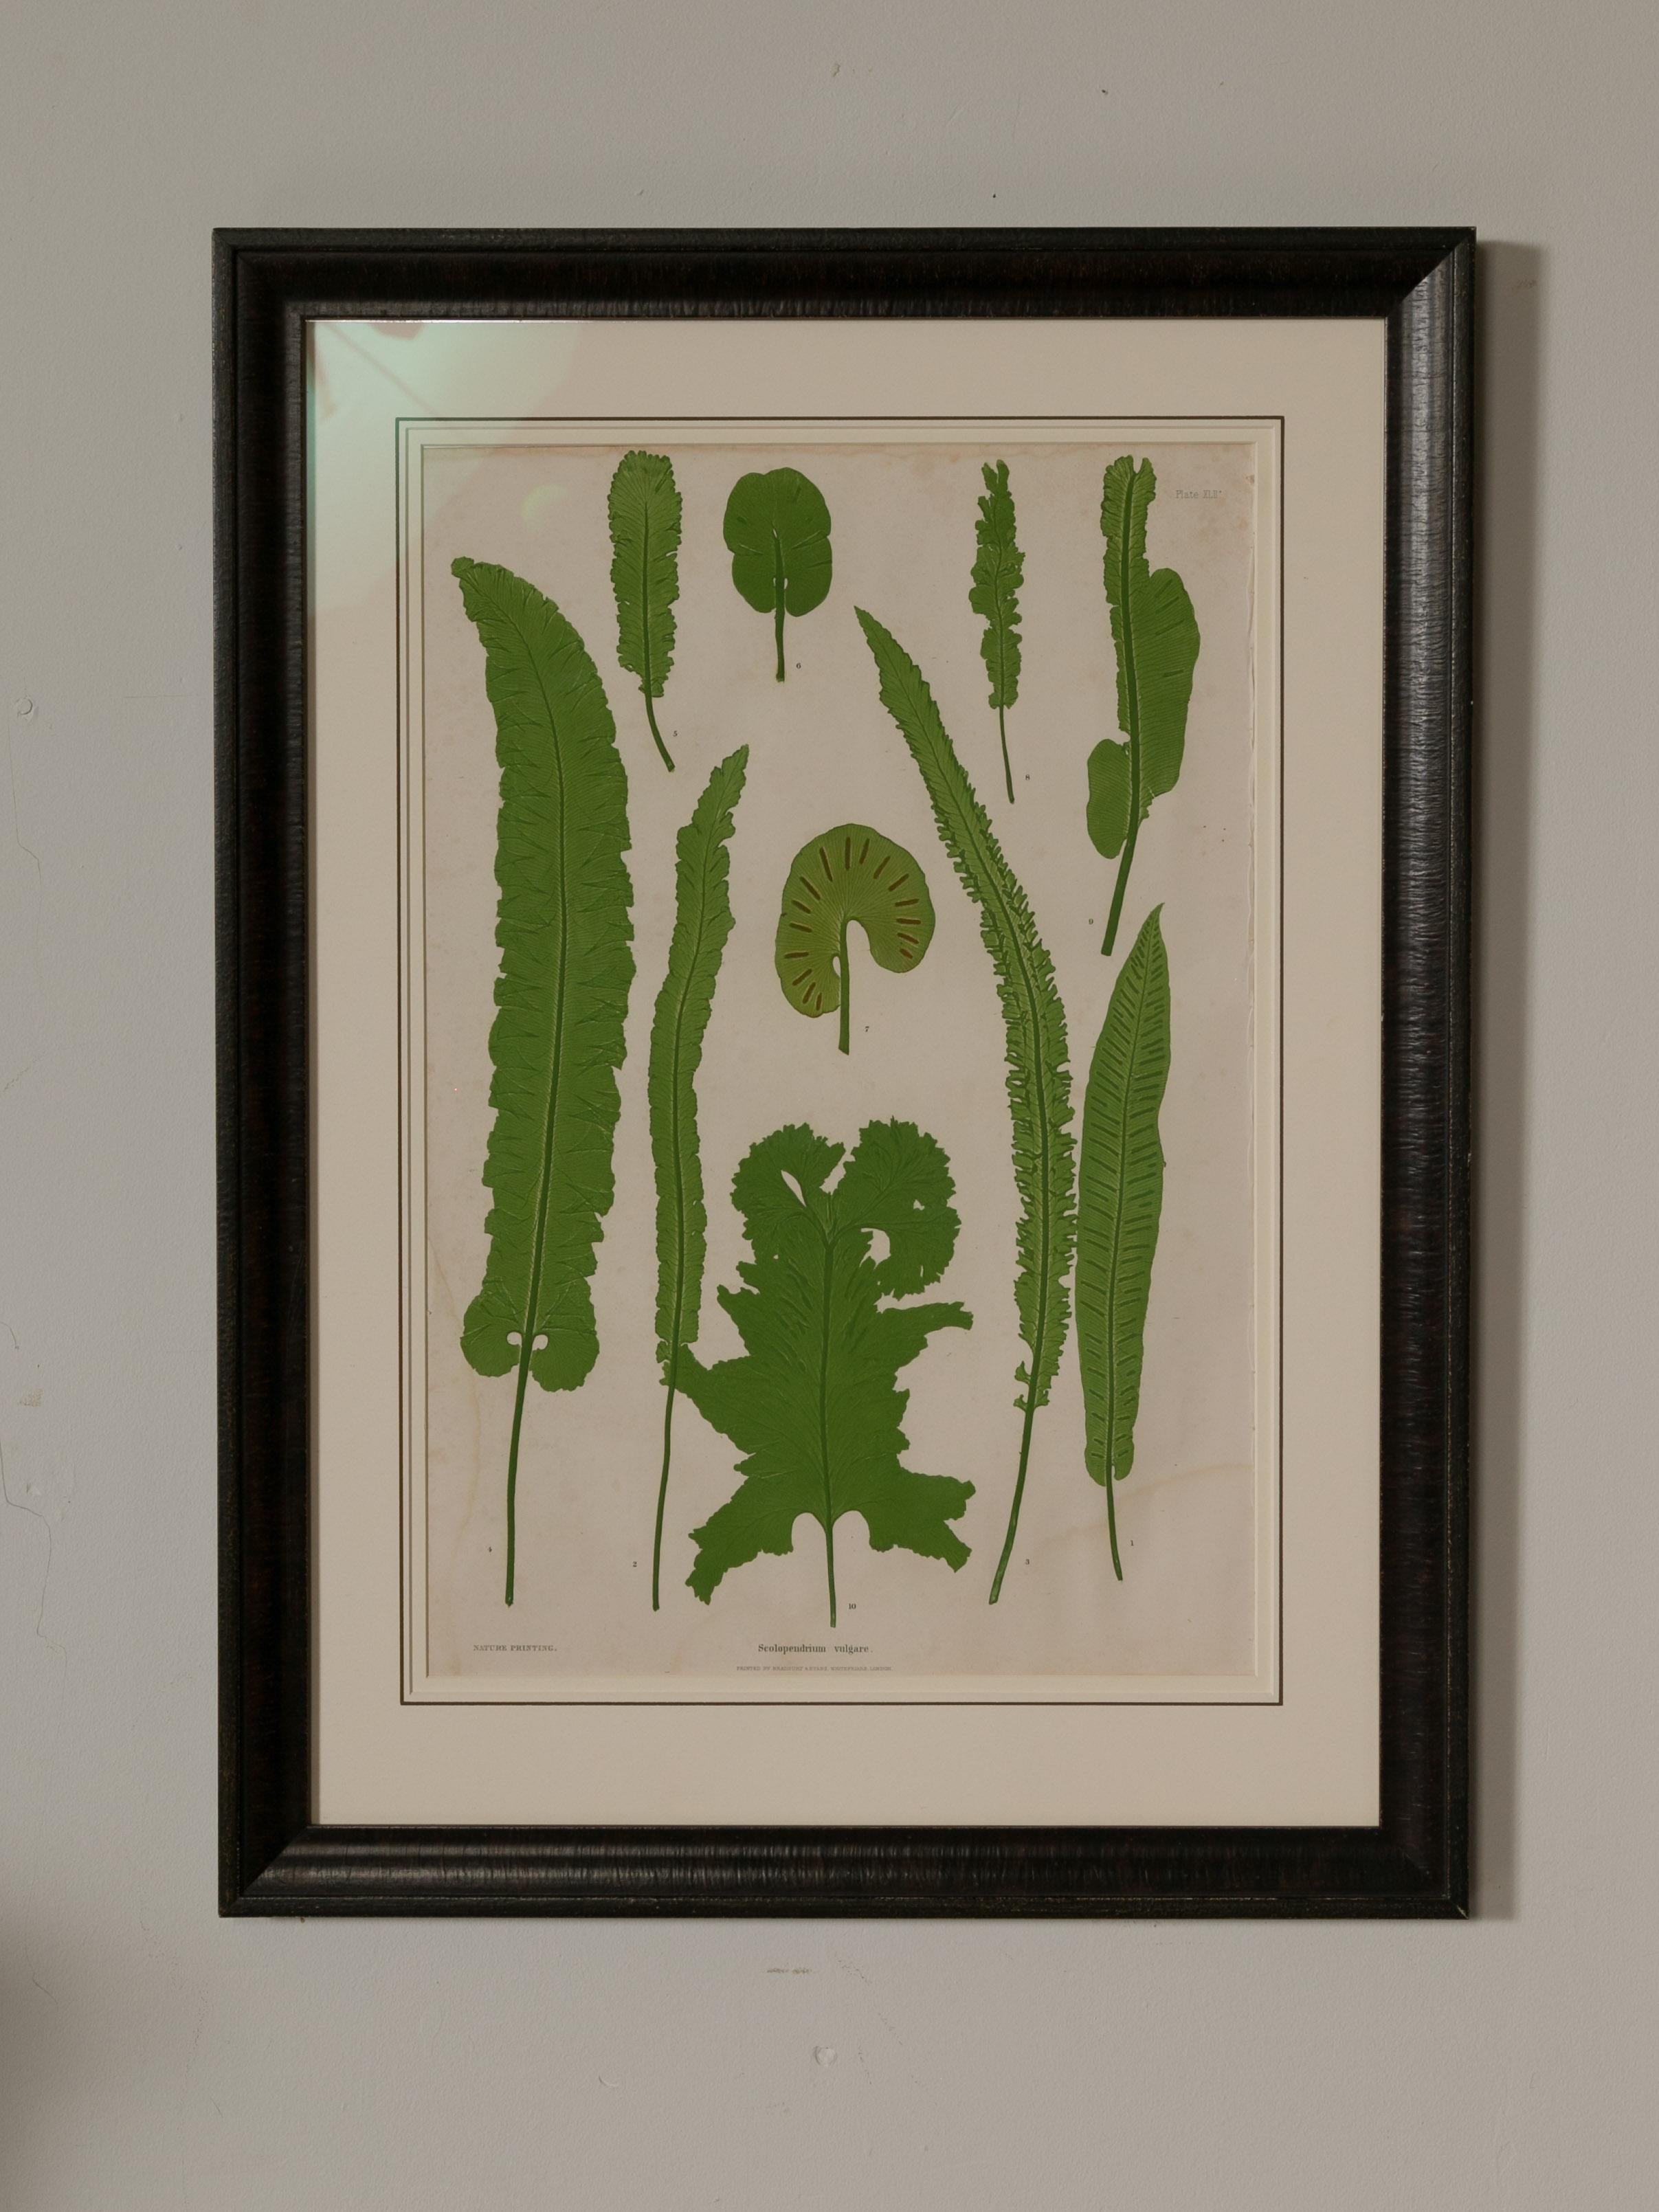 Set of Four 19th Century English Victorian Nature Printed Ferns in Black Frames For Sale 6